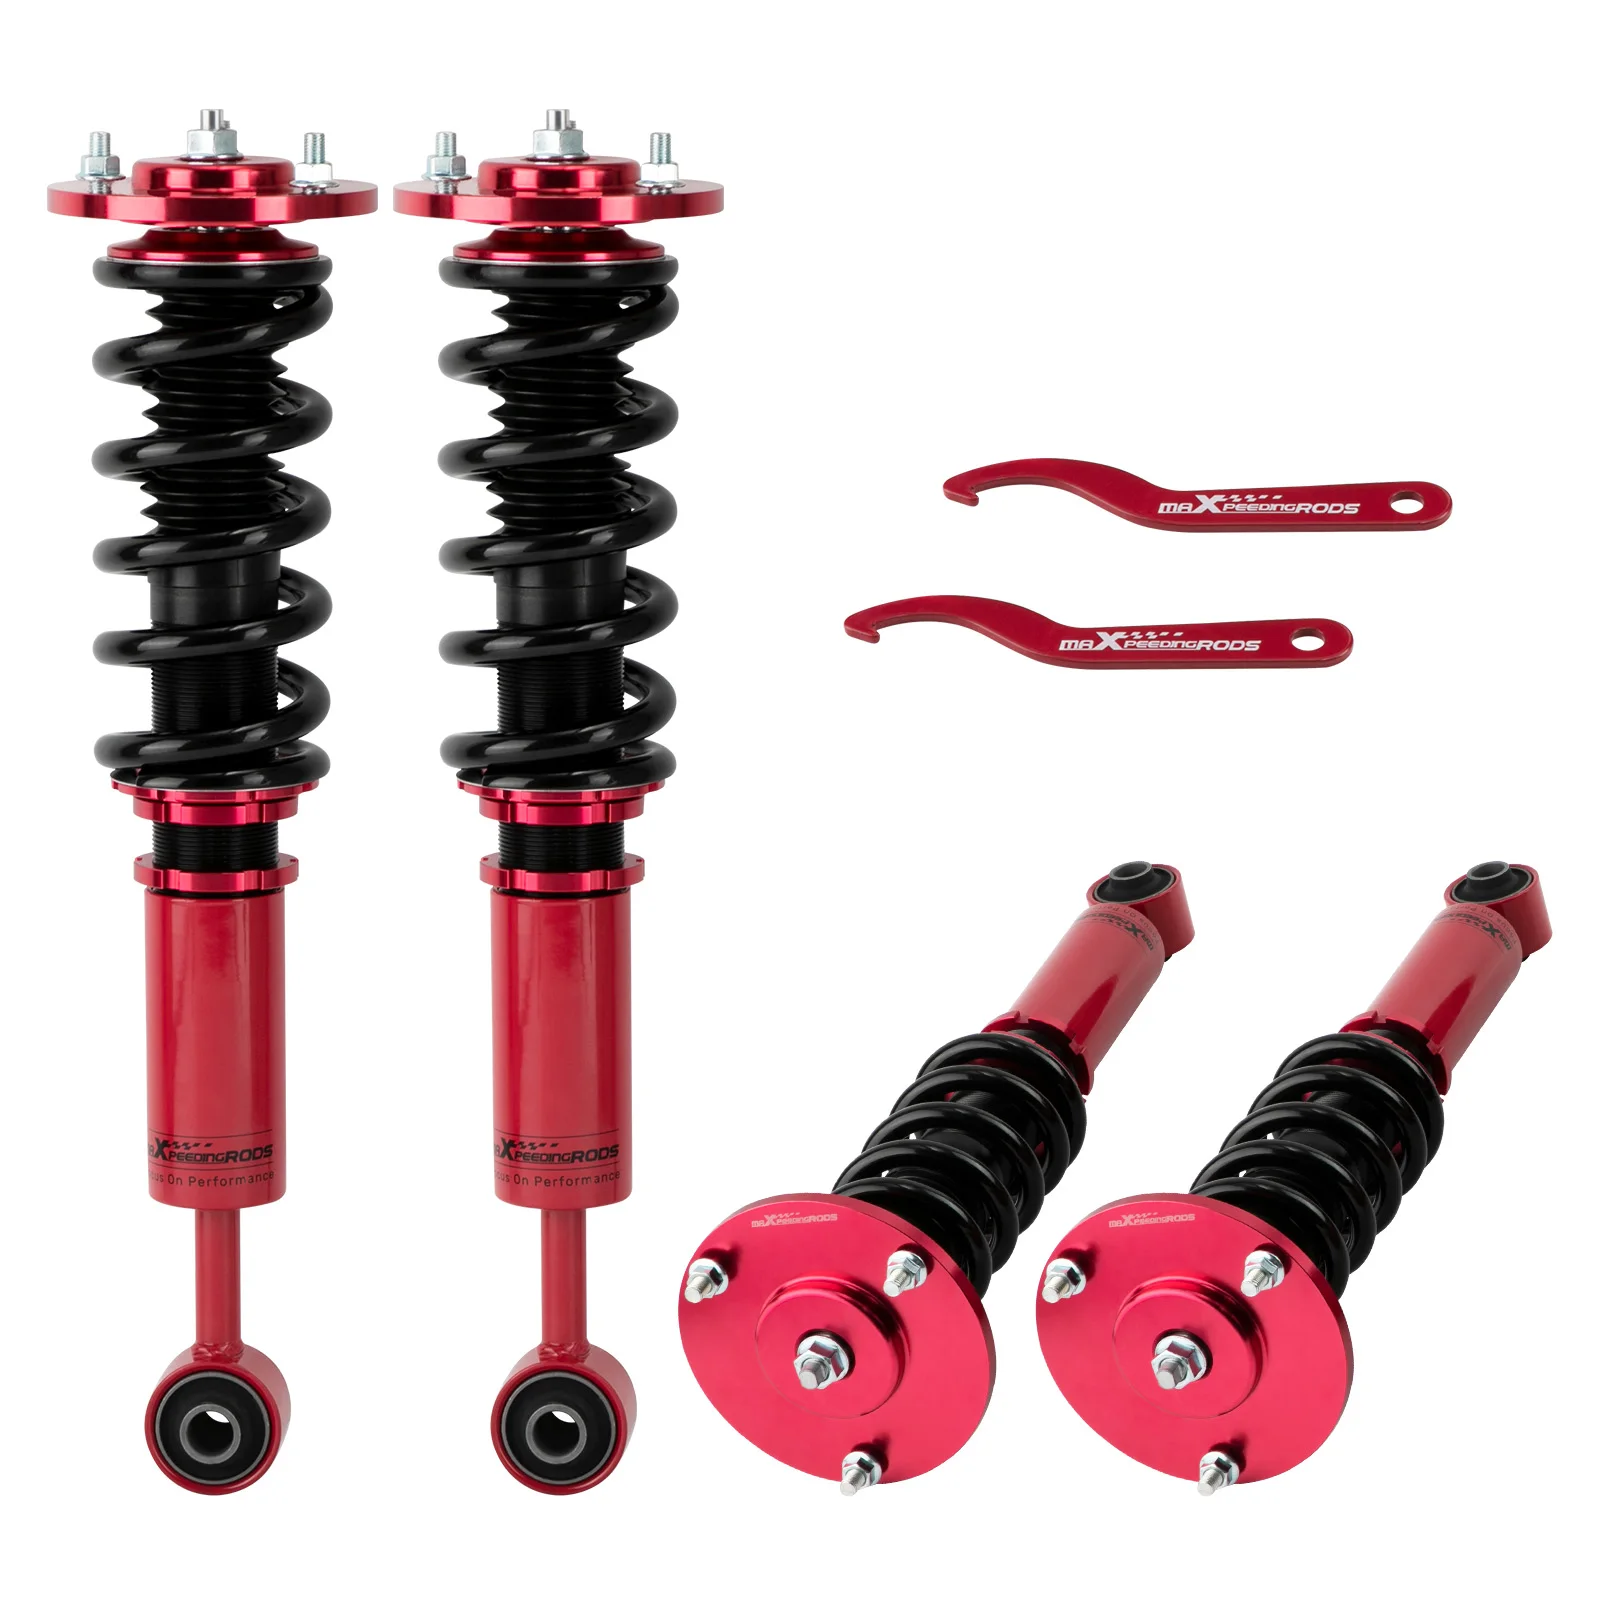 

Maxpeedingrods Shocks Strut For Ford Expedition Lincoln Navigator 03-06 Coilover Suspension Coilovers Struts Lower Coils Spring